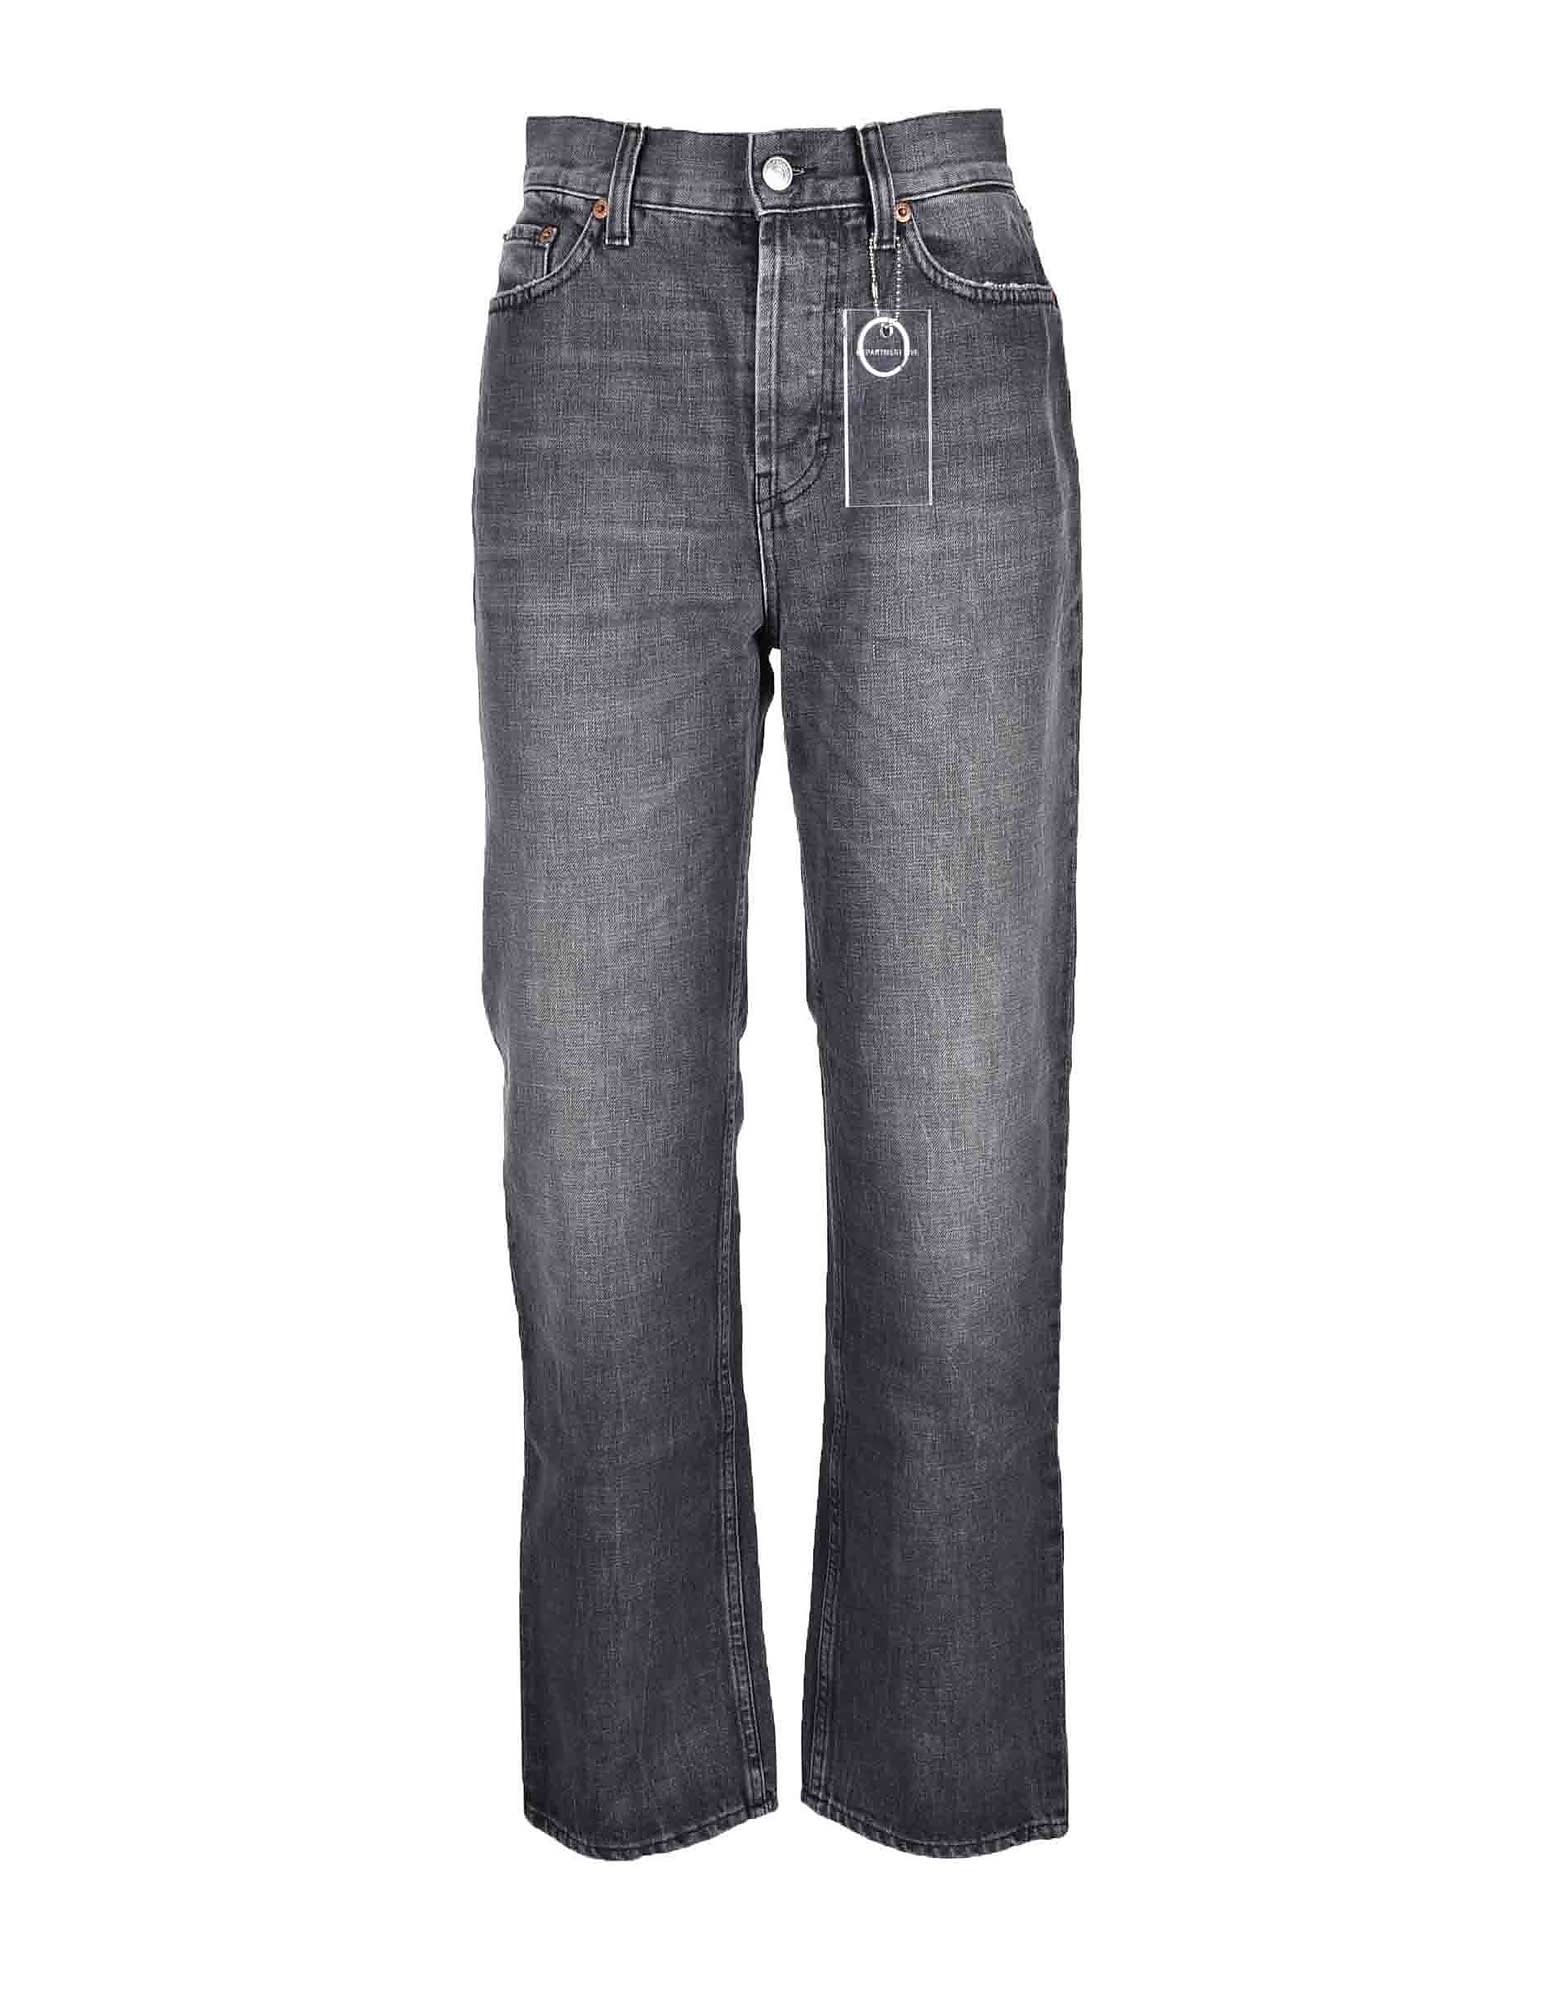 Department Five Womens Gray Jeans